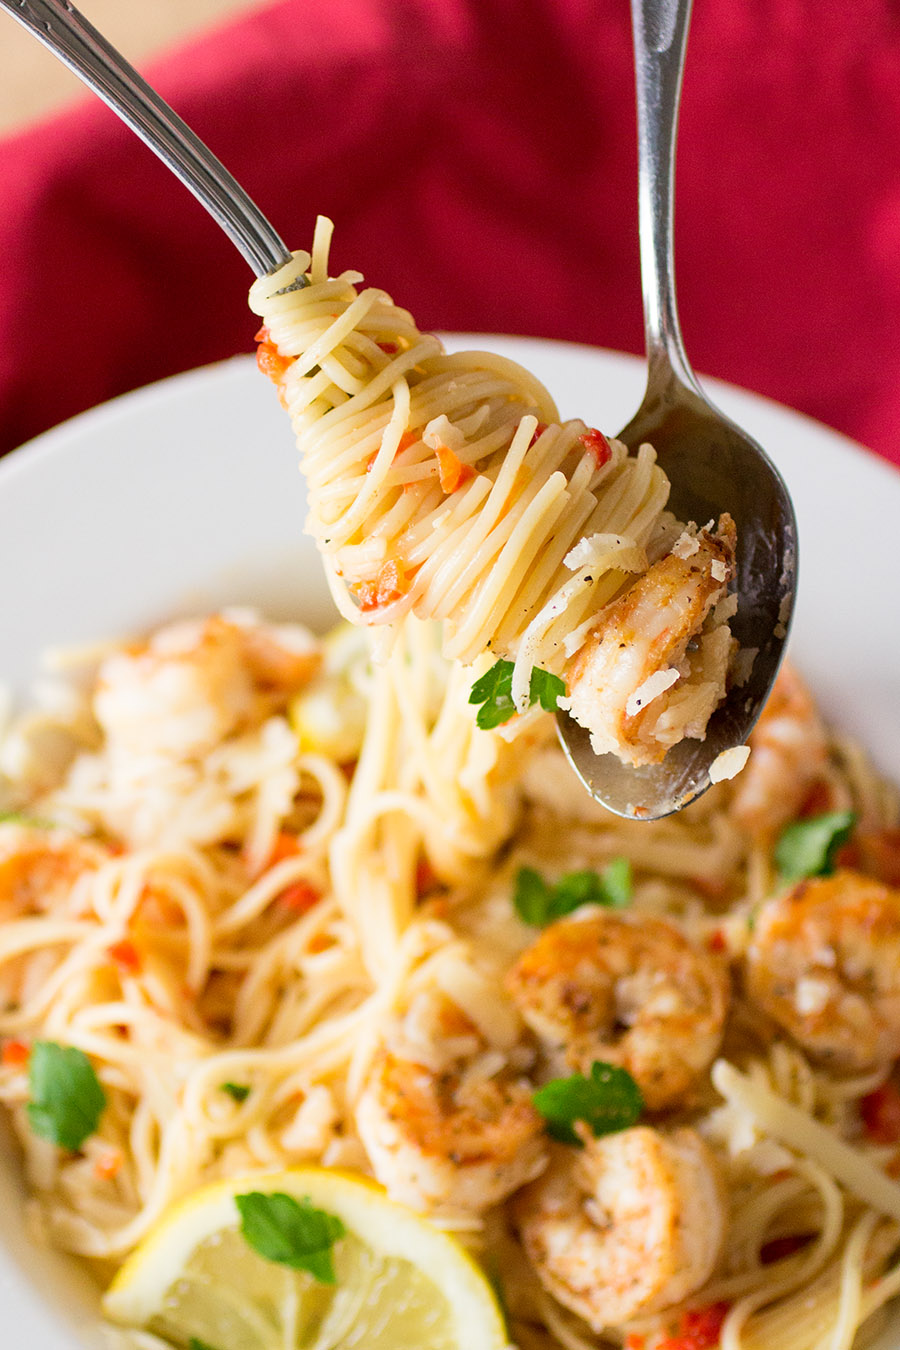 A forkful of the delicious Shrimp Pasta with Creamy Roasted Red Pepper Sauce